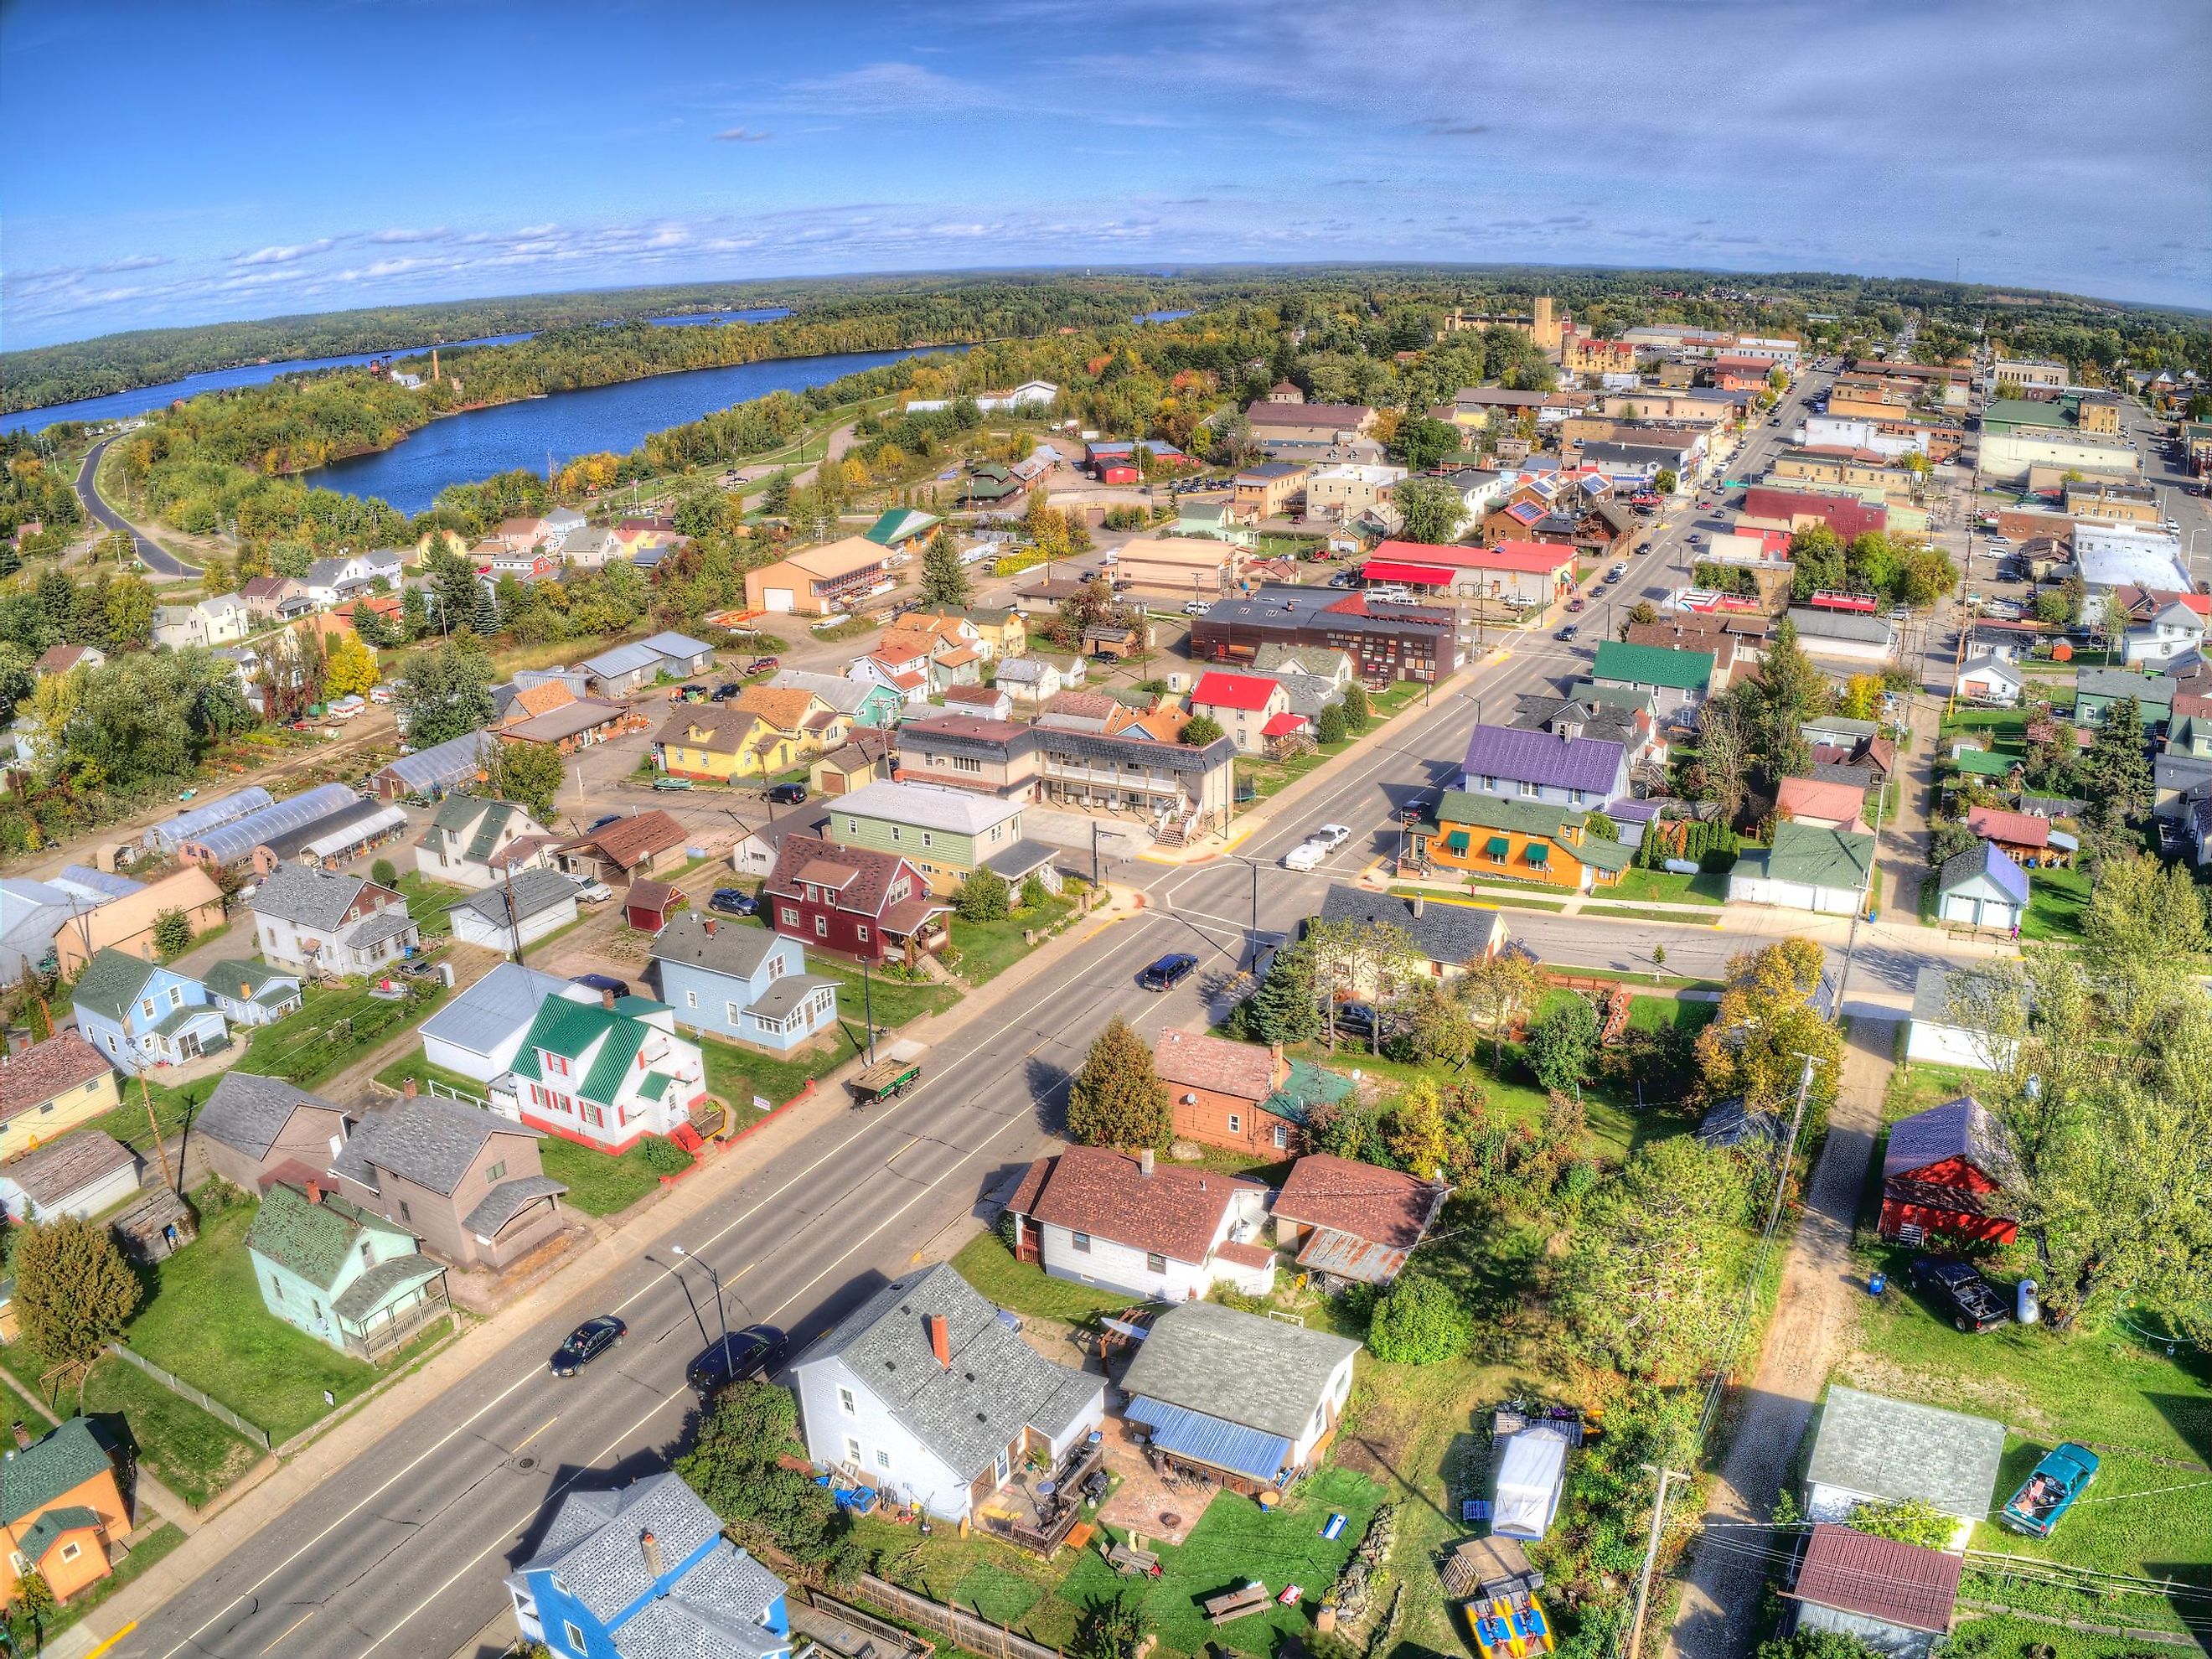 Aerial View of Ely, Minnesota during Summer